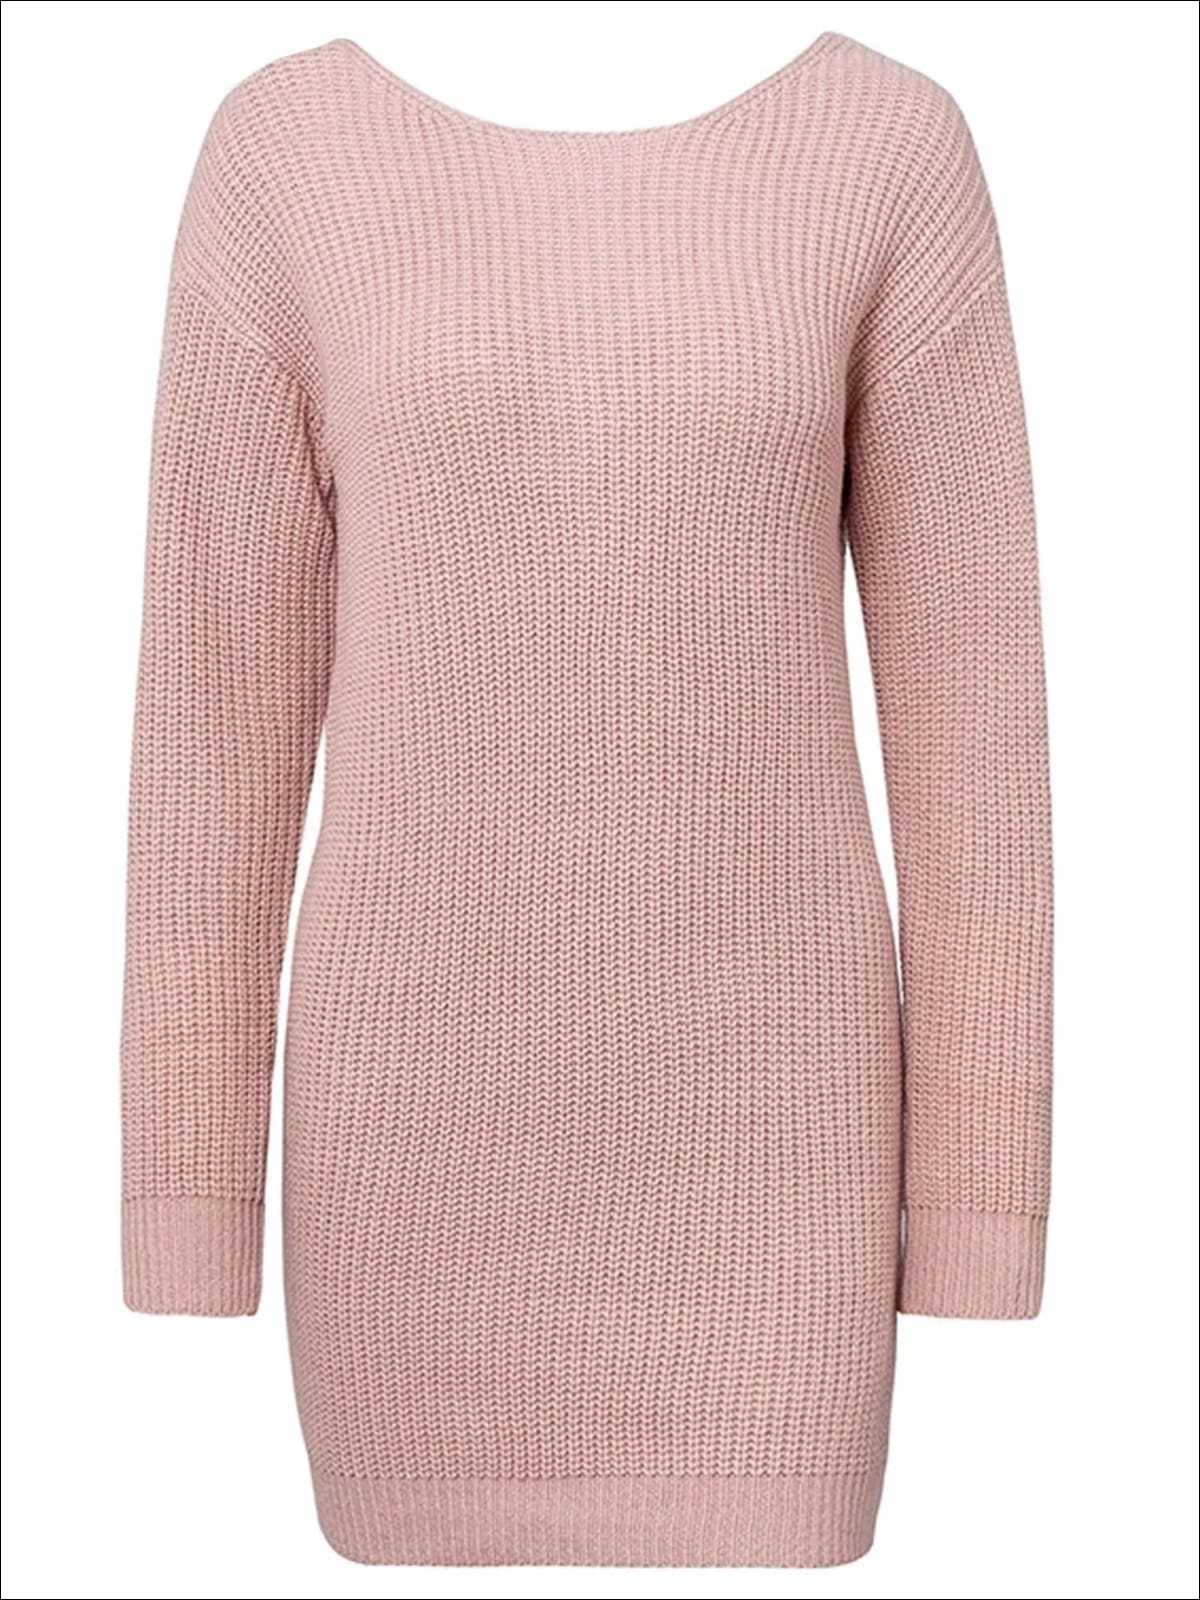 Womens Off The Shoulder Twisted Back Sweater Dress - Pink / One Size - Womens Fall Dresses